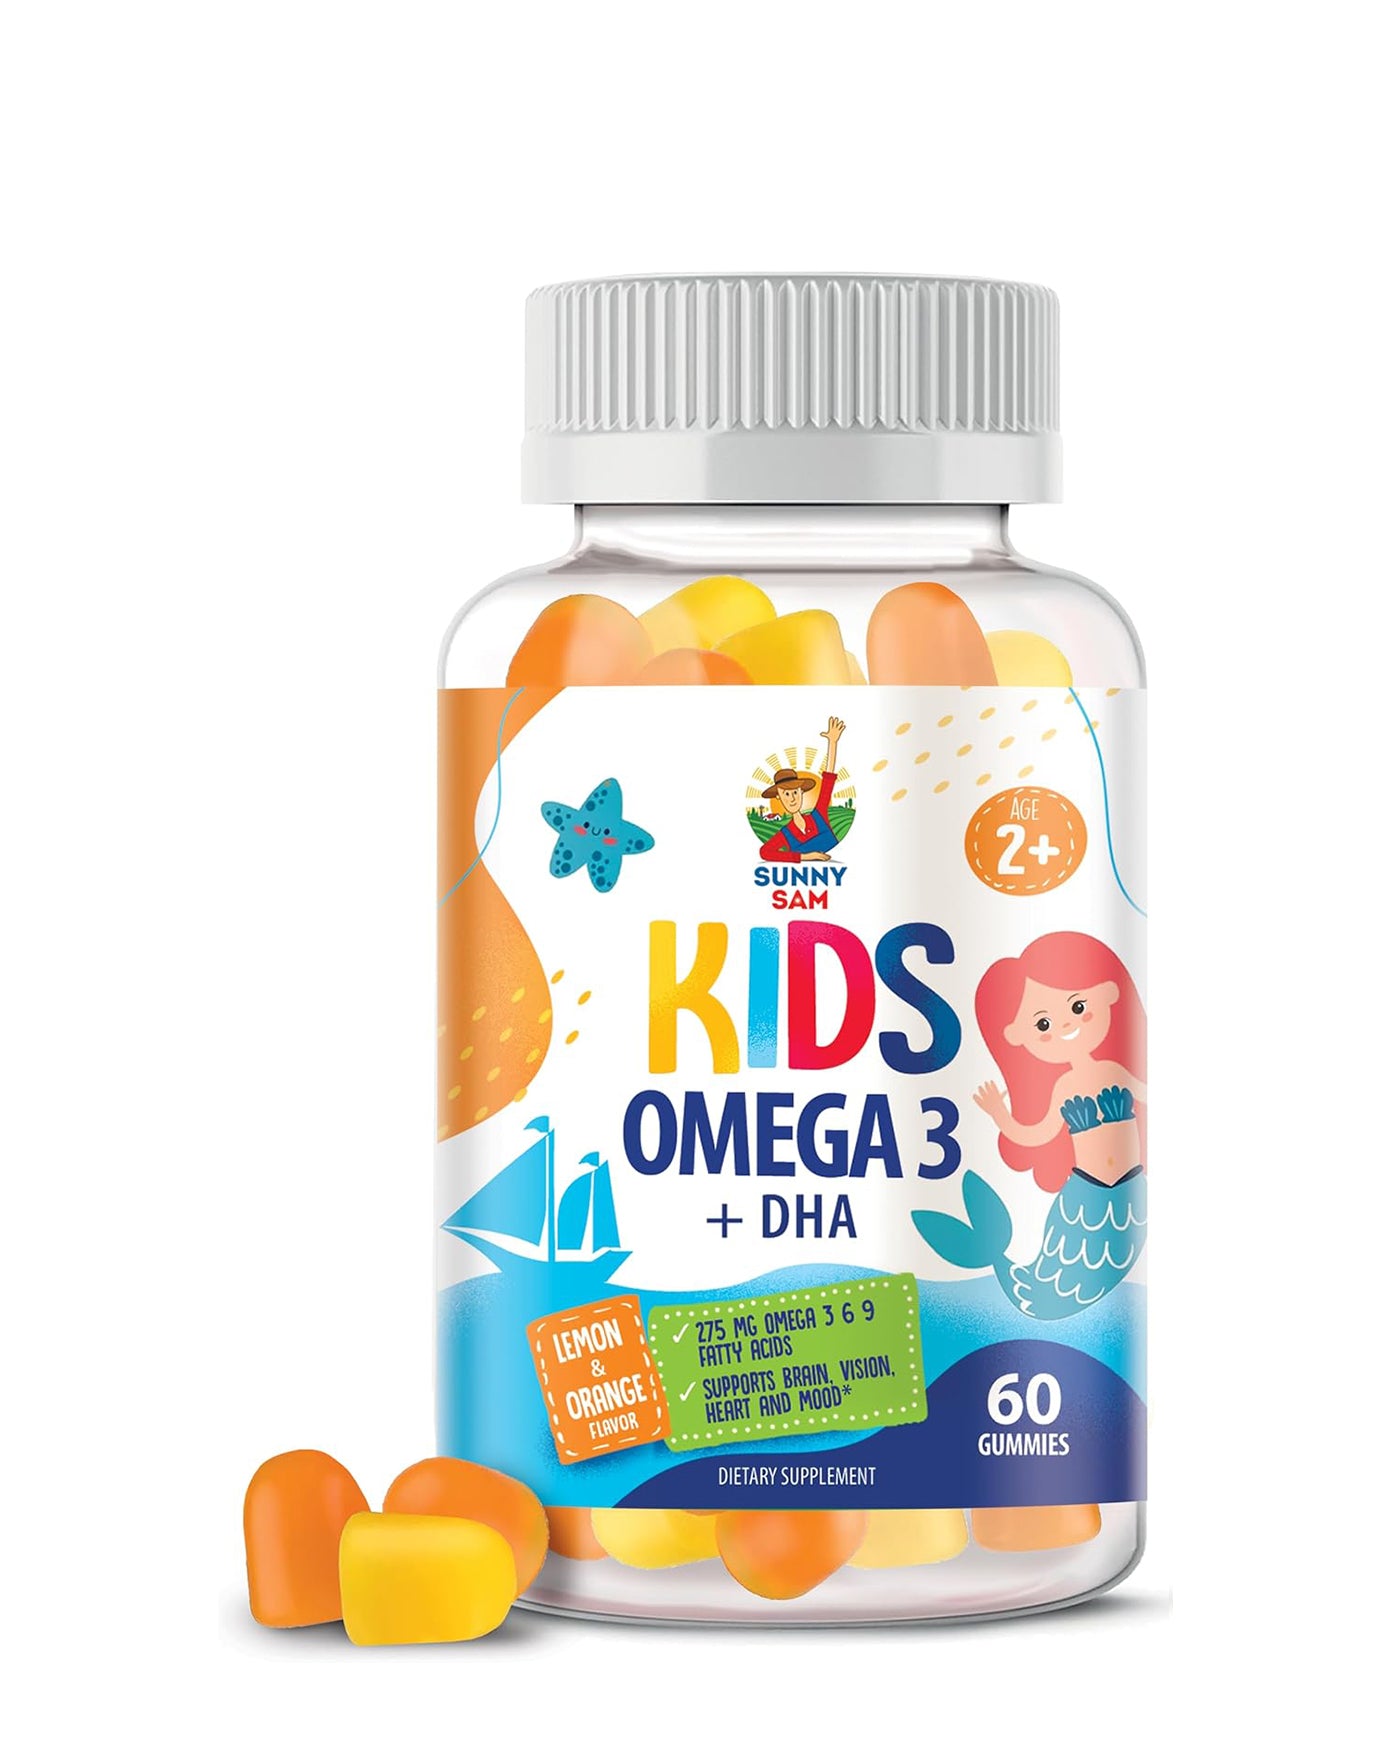 Omega 3 Gummies for Kids & Adults - Brain, Heart, and Vision Support Vitamins